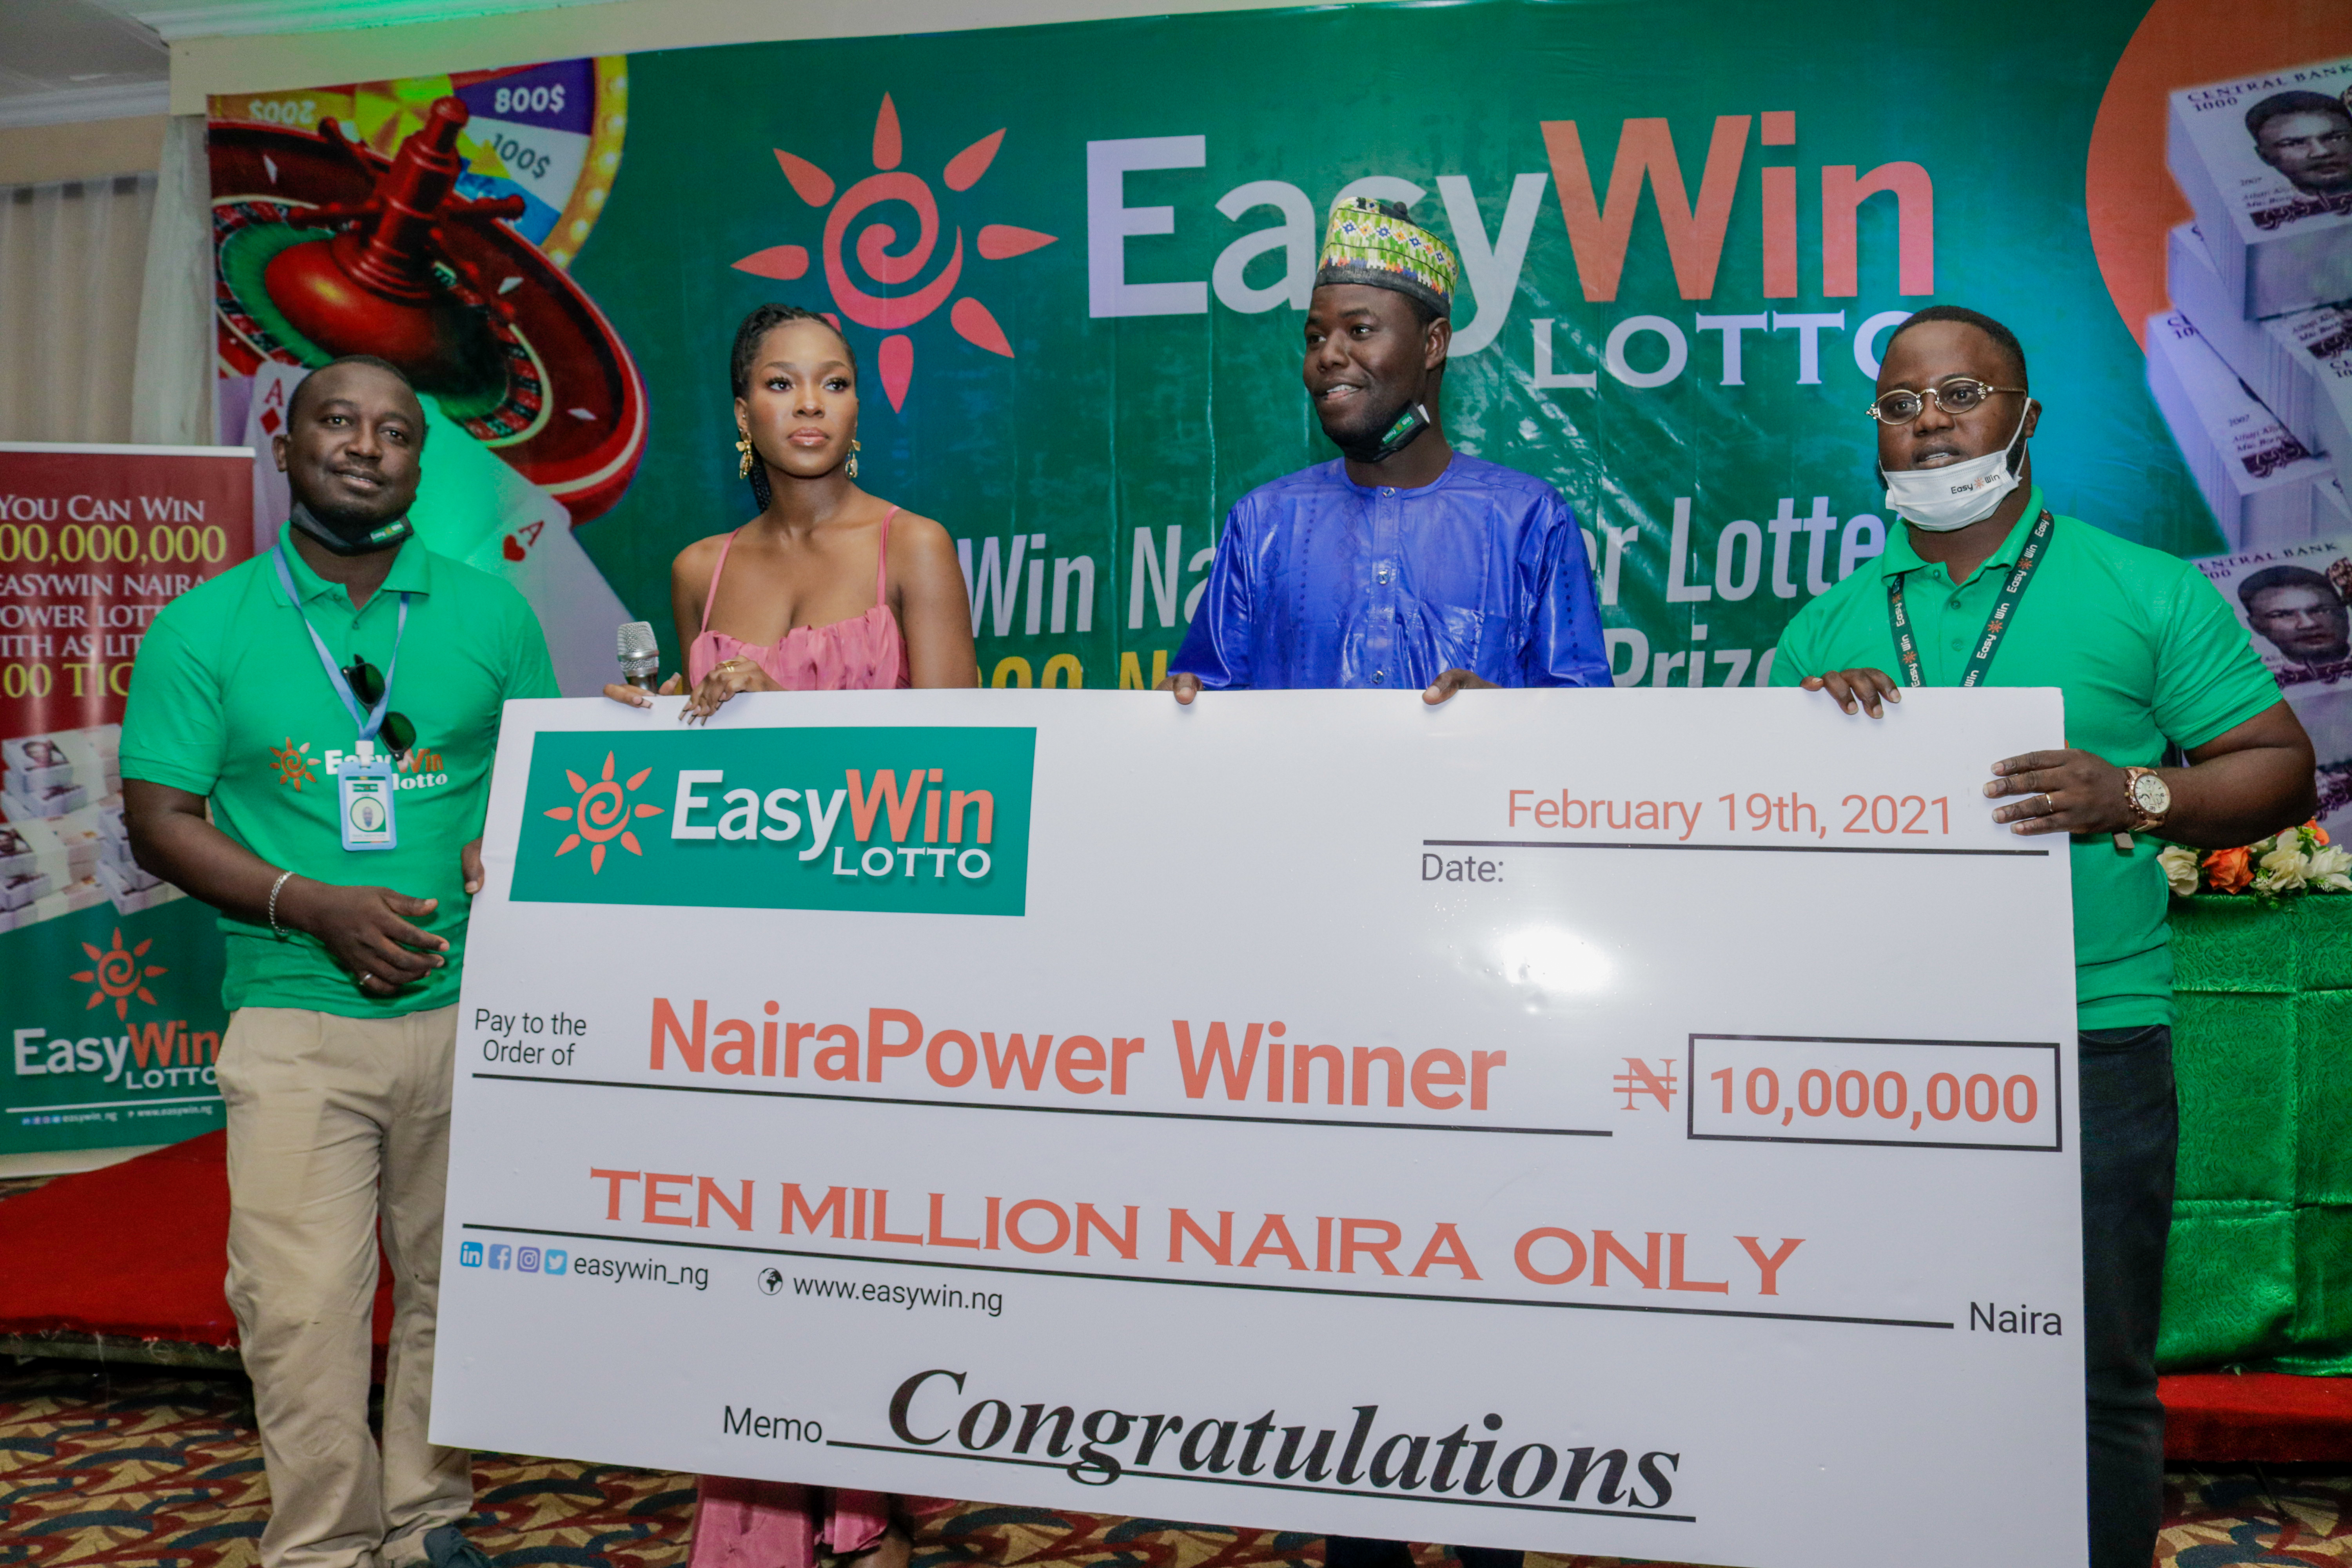 How Much Can You Win in the Nigerian Lottery